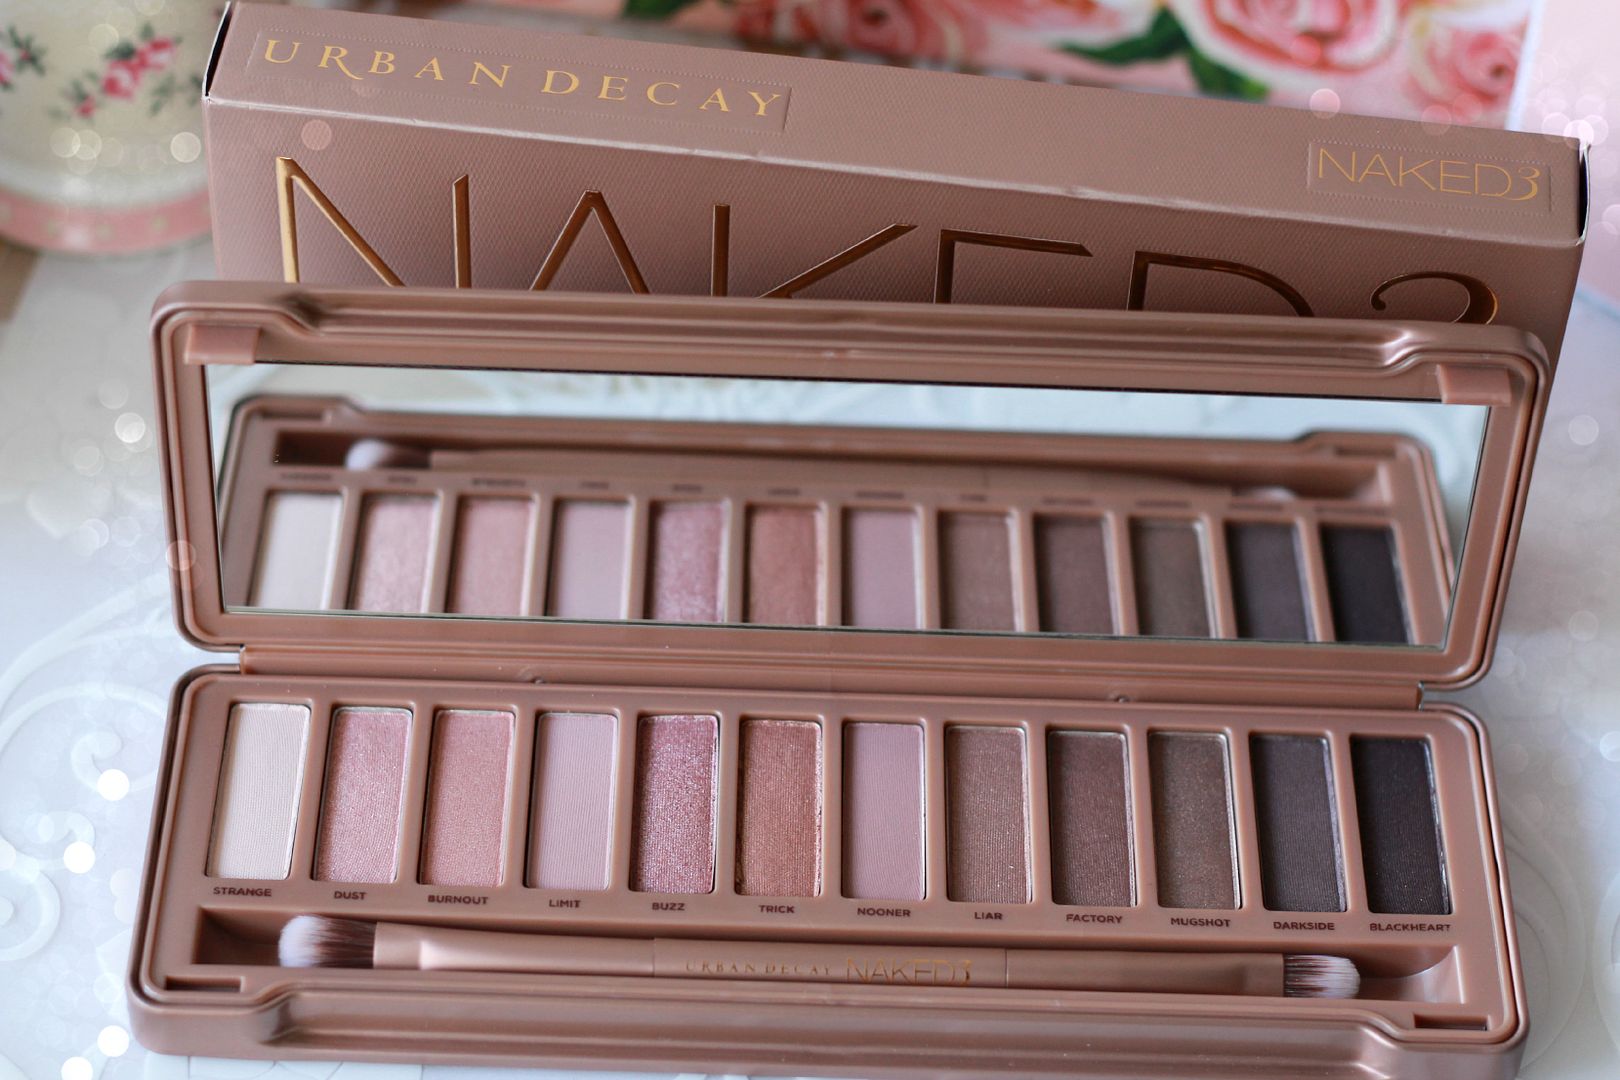 Makeup Madness: Dupe! Urban Decay Naked 3 Palette